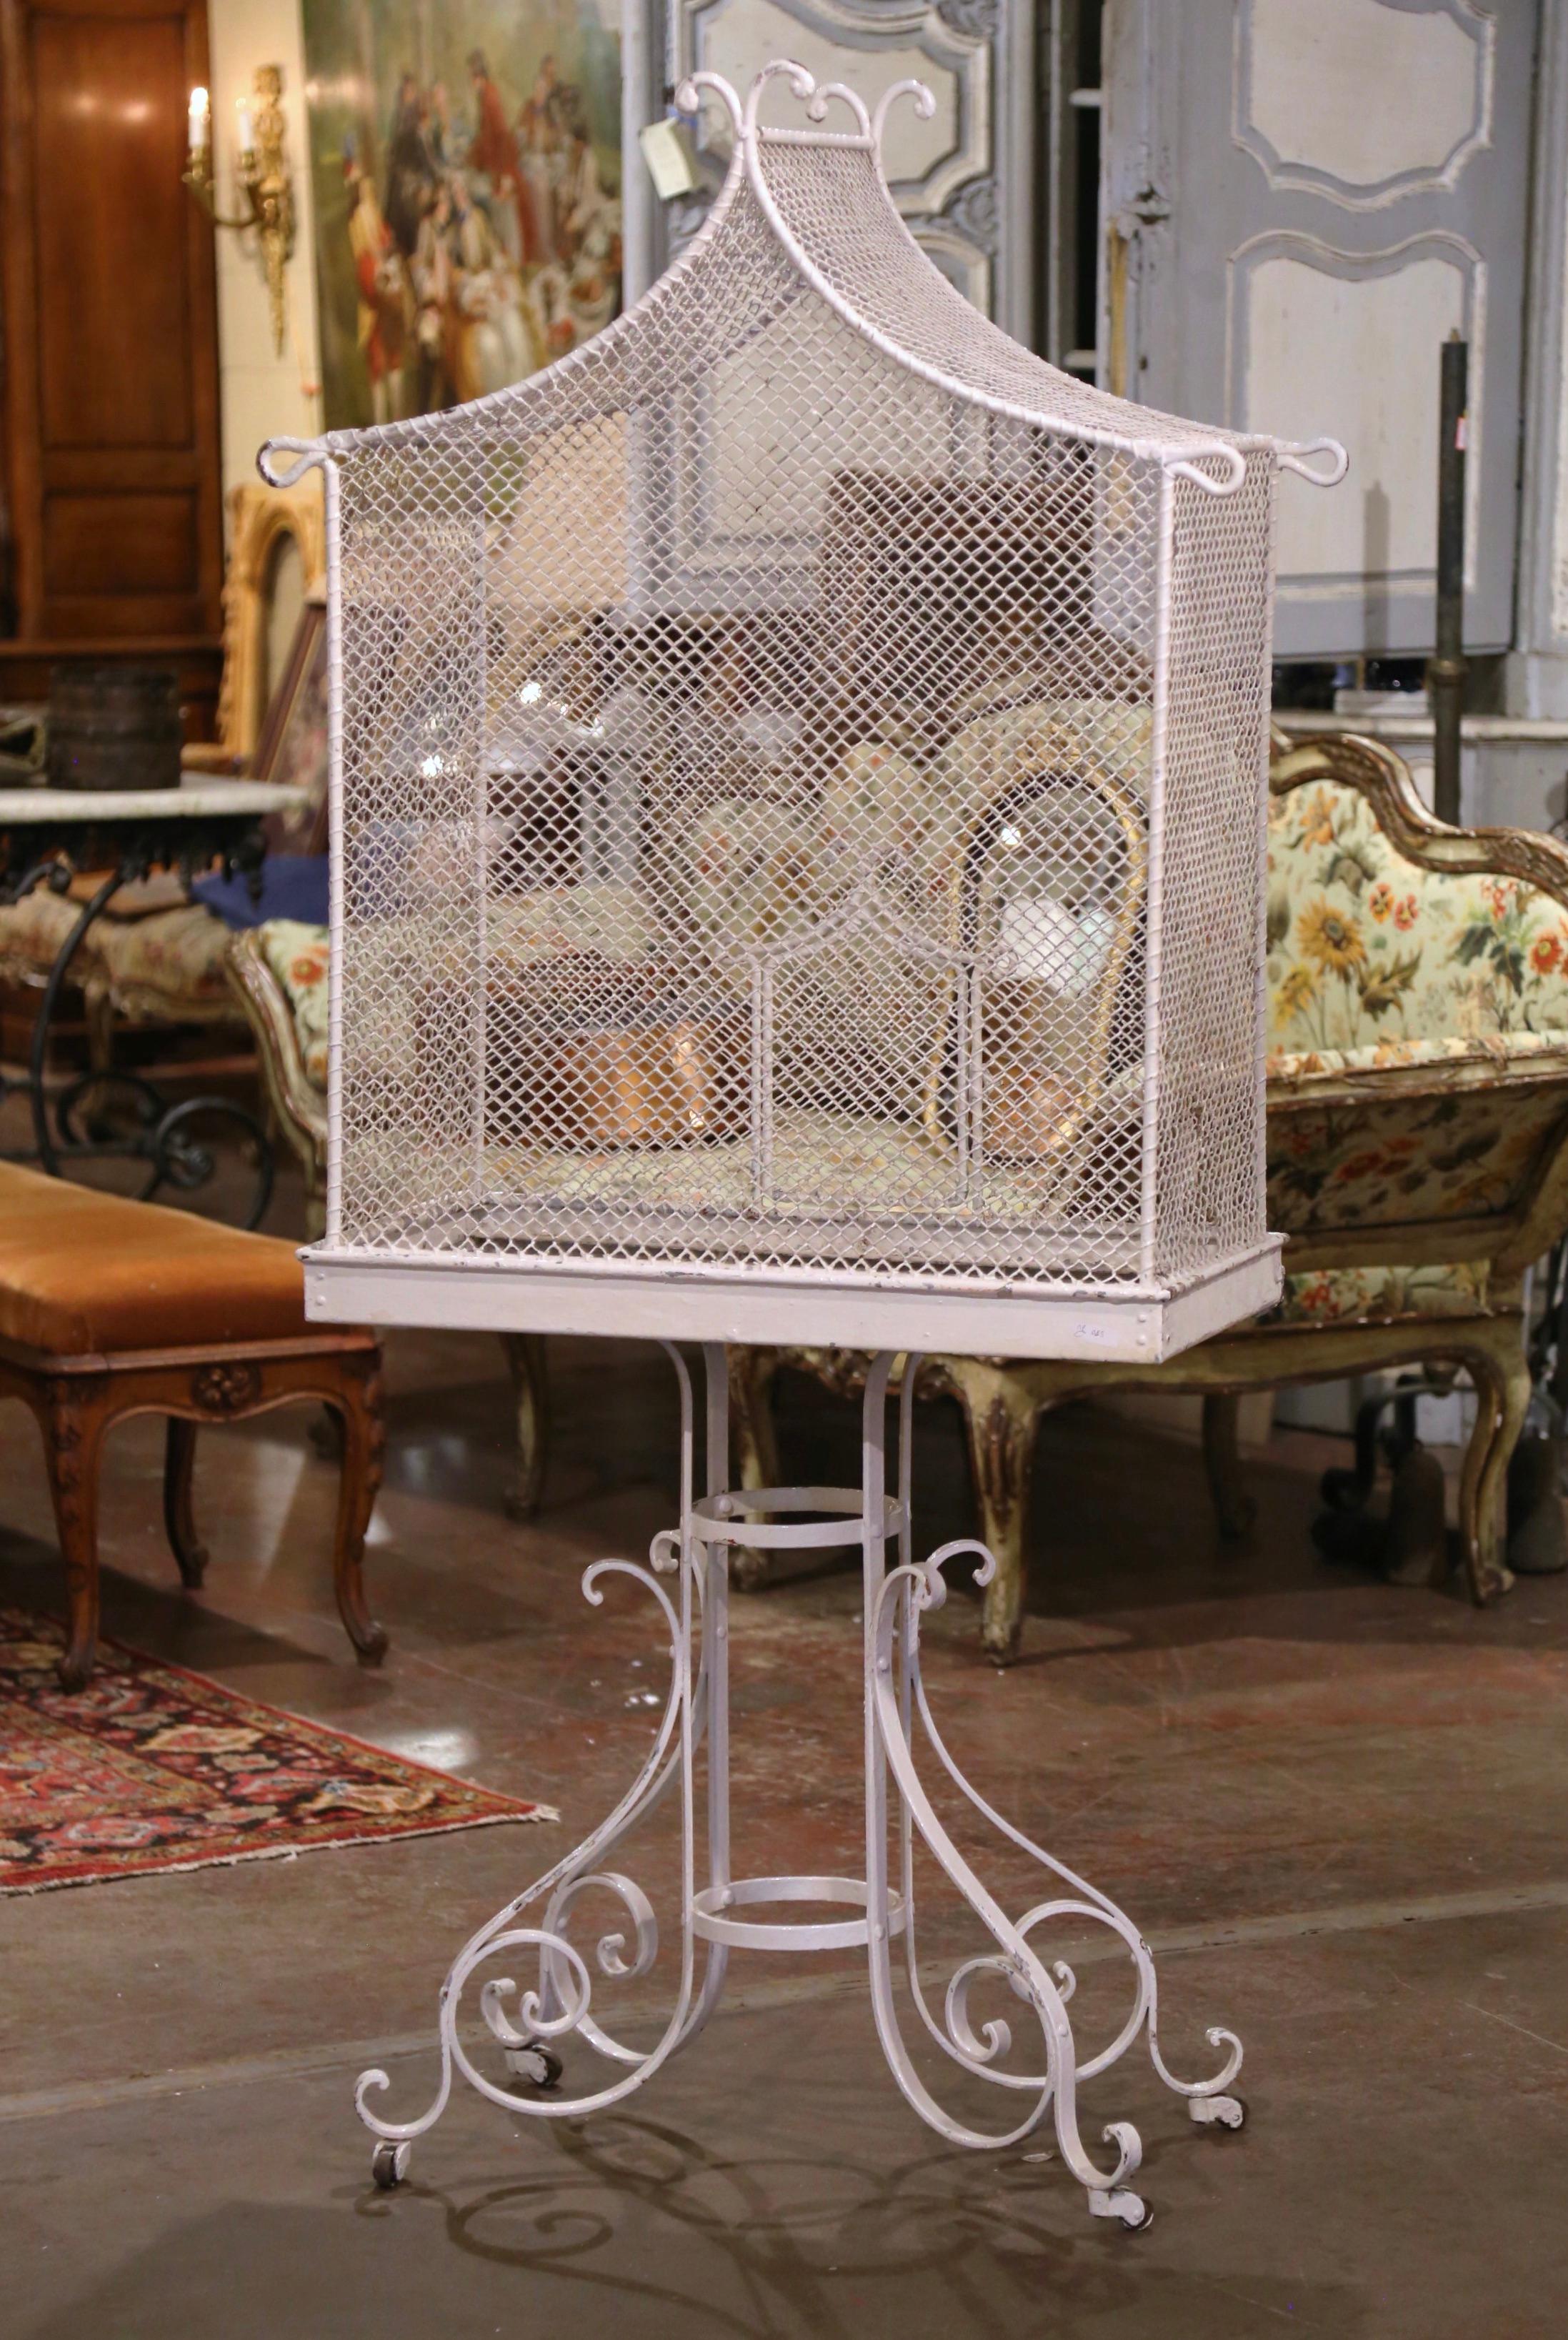 Early 20th Century French Painted Iron and Wire Aviary Birdcage on Wheels For Sale 1